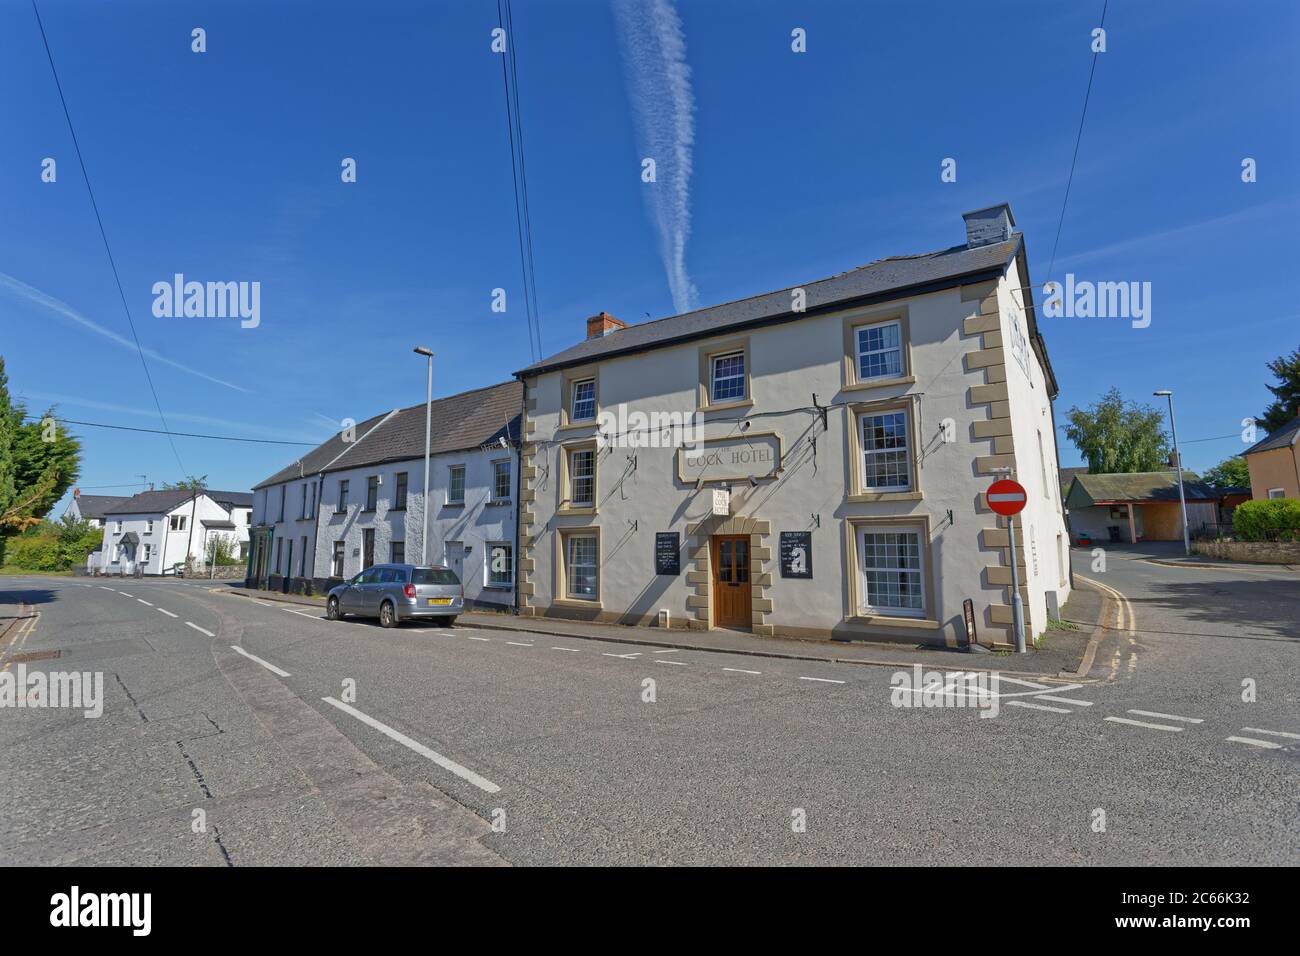 The Cock Hotel in the village of Bronllys in Powys, Wles, UK. Tuesday 19 May 2020 Stock Photo